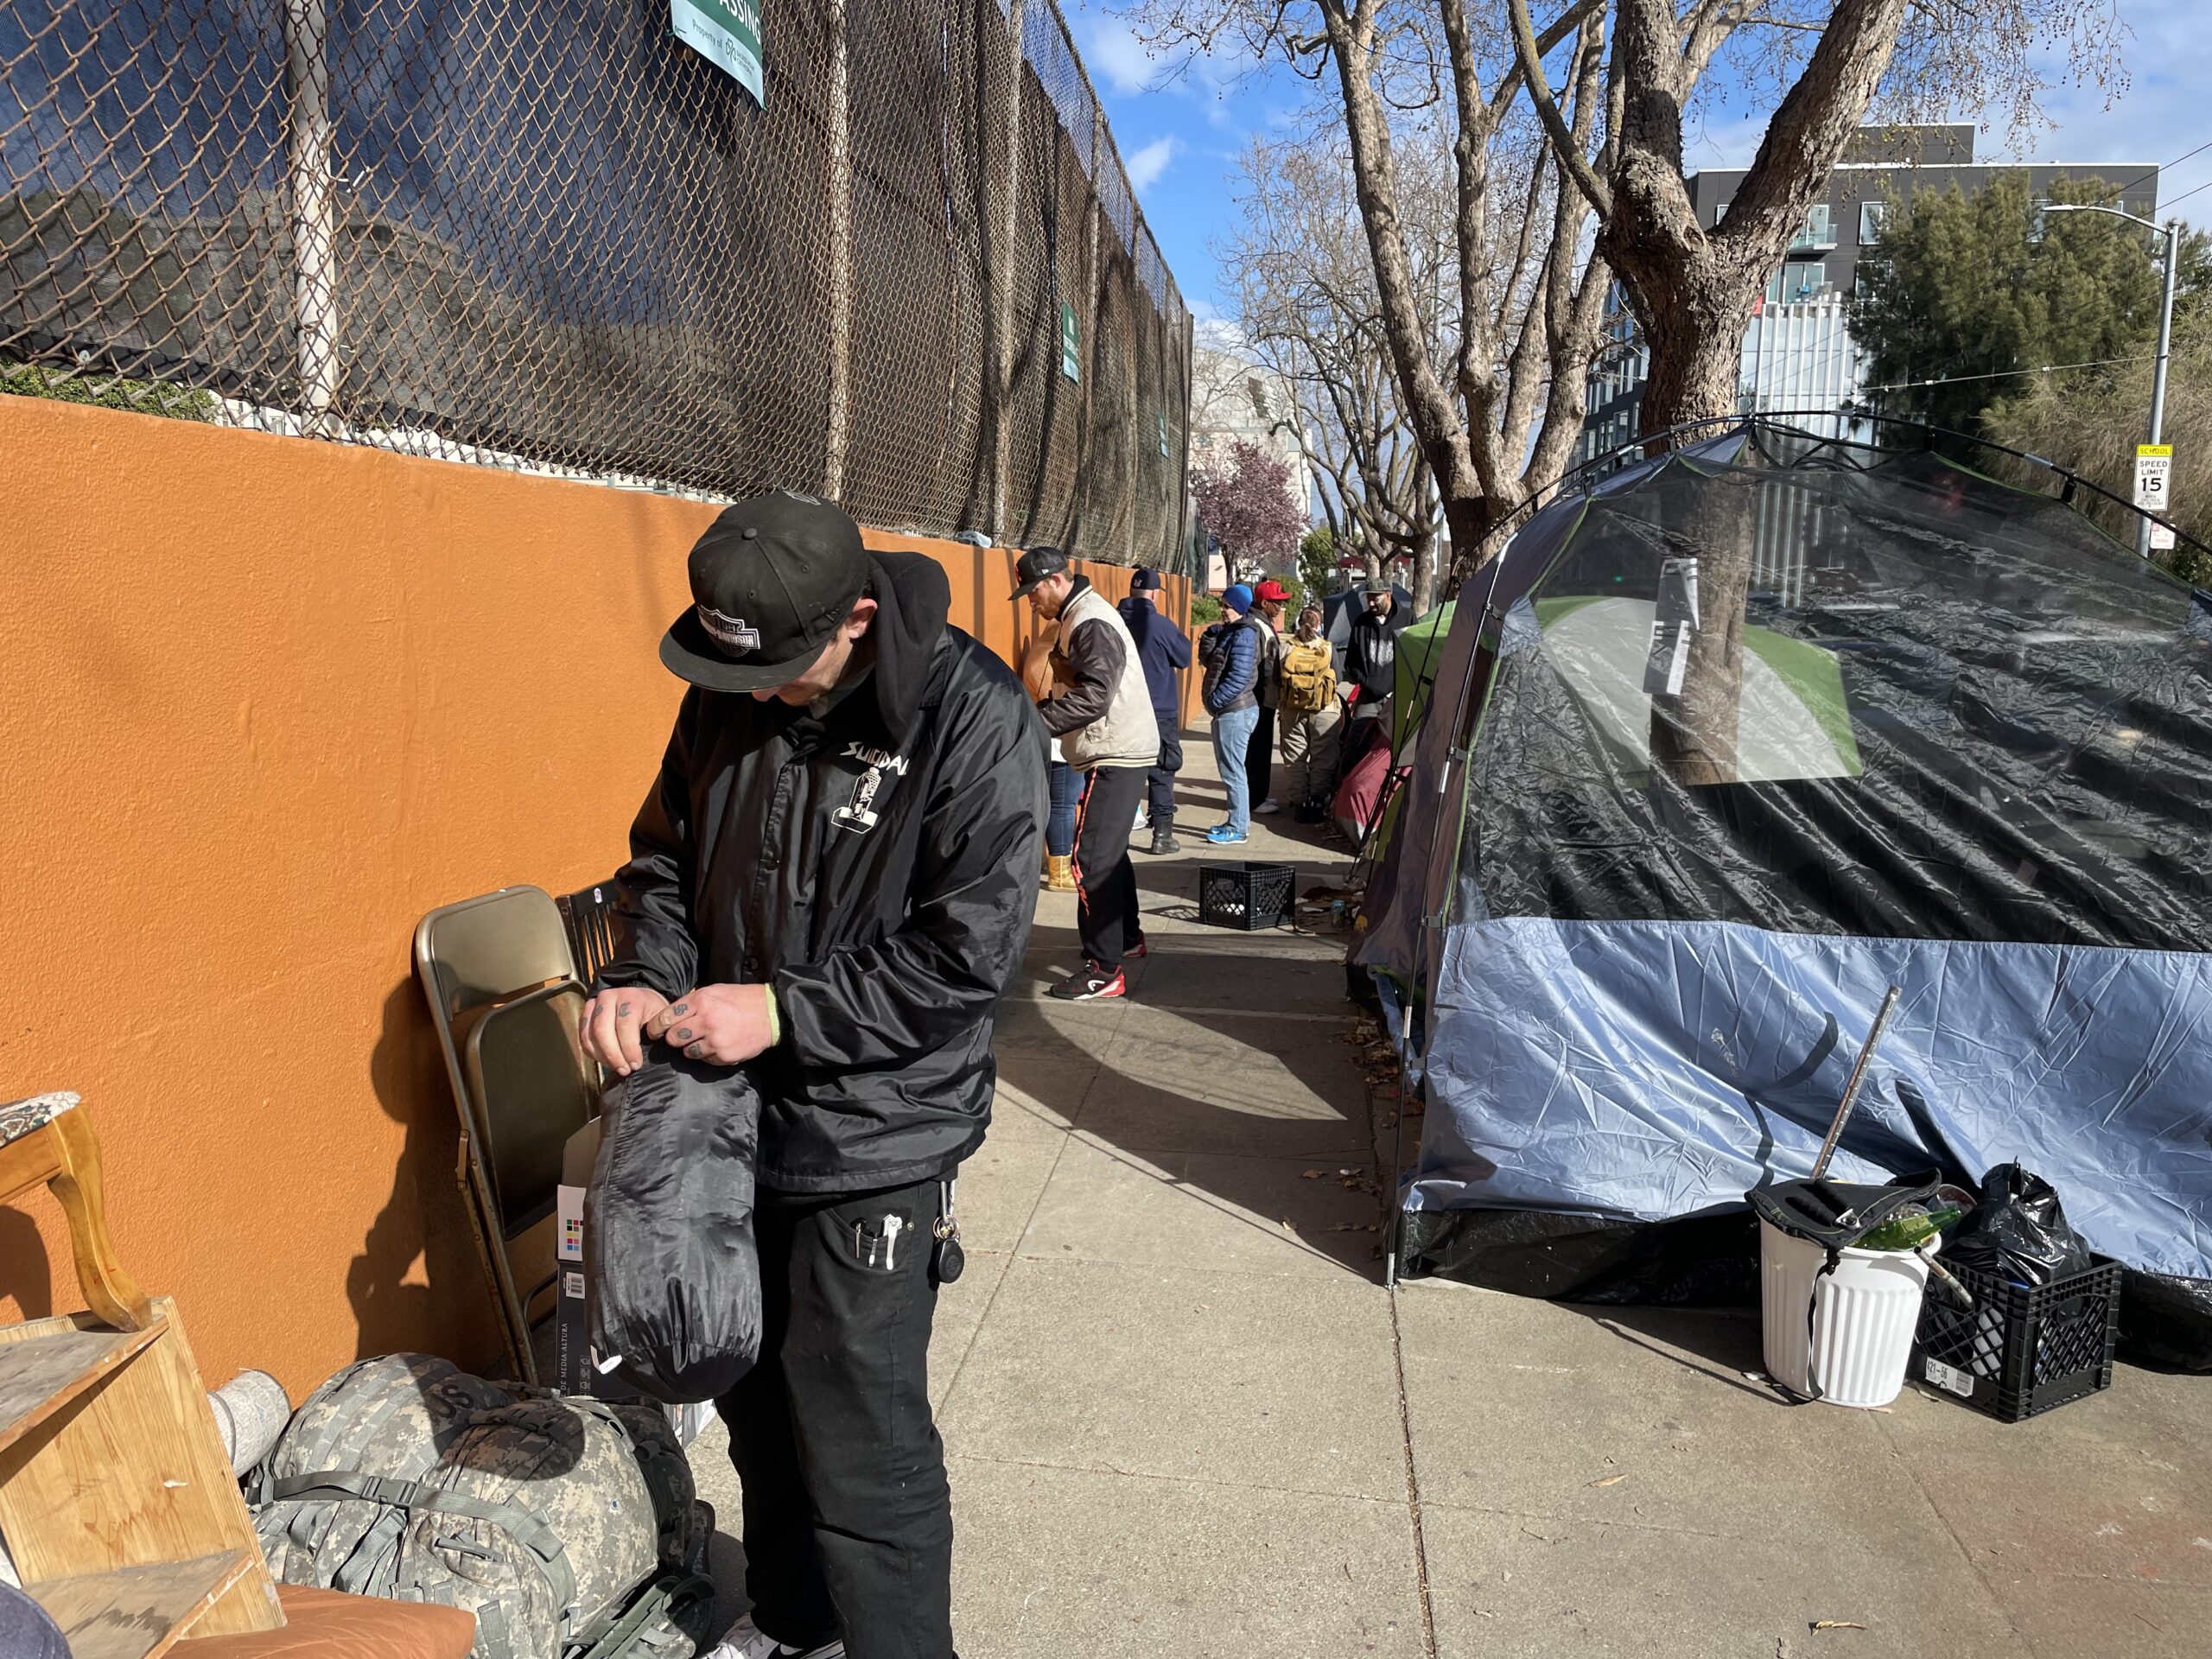 Court Order Blocking Homeless Sweeps Leaves Residents, City Workers in Ambiguity